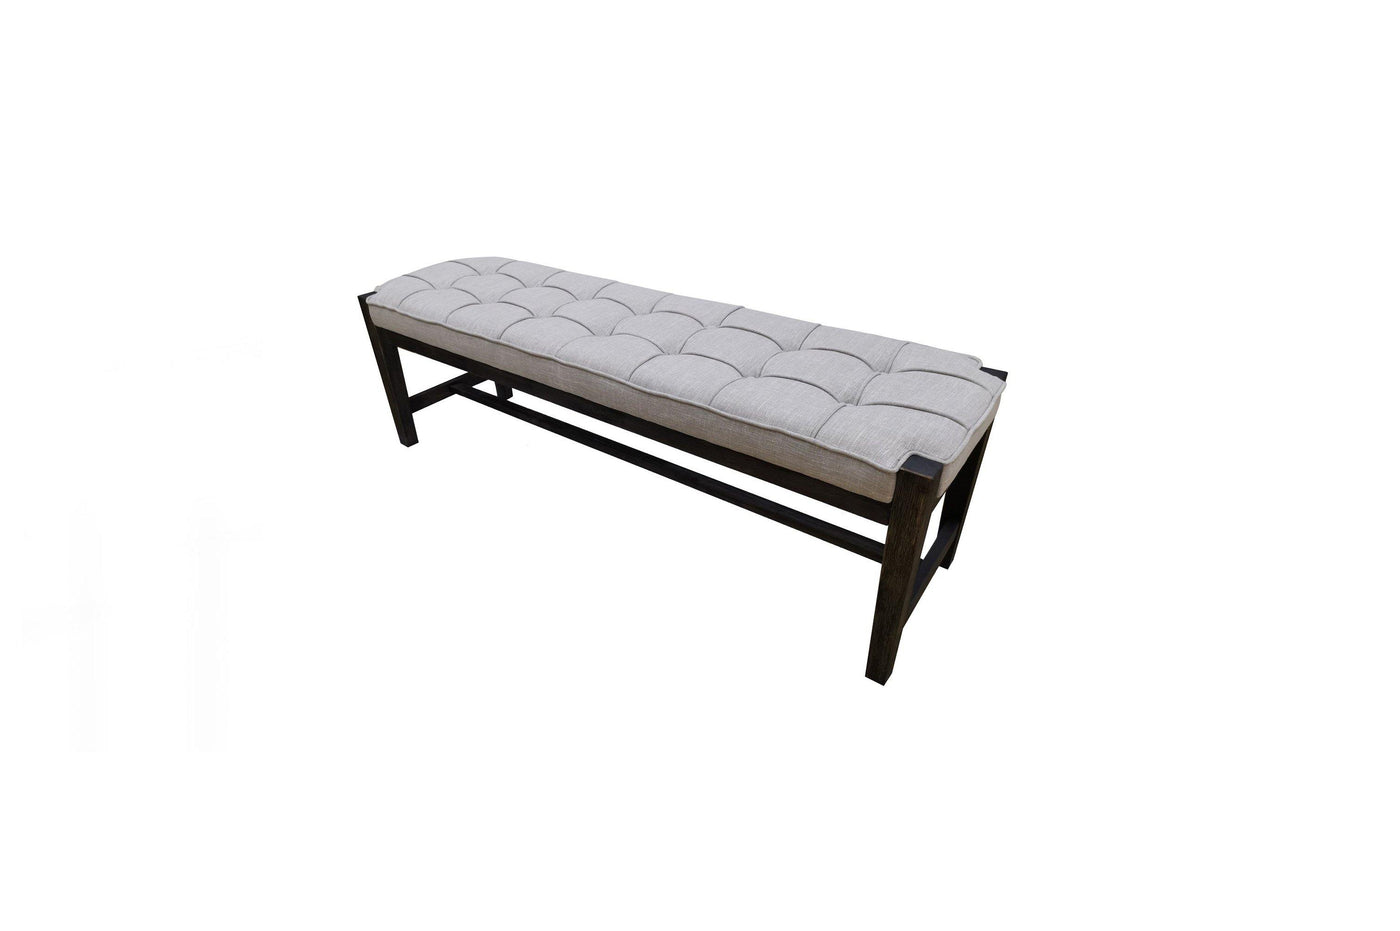 Chris bench Hoya Casa Hoyacasa.ca couch sofa bed 4 seater sectional table kitchen table love seat sofa bed matress Toronto Canada manufactures home decoration frames indoor Ottoman